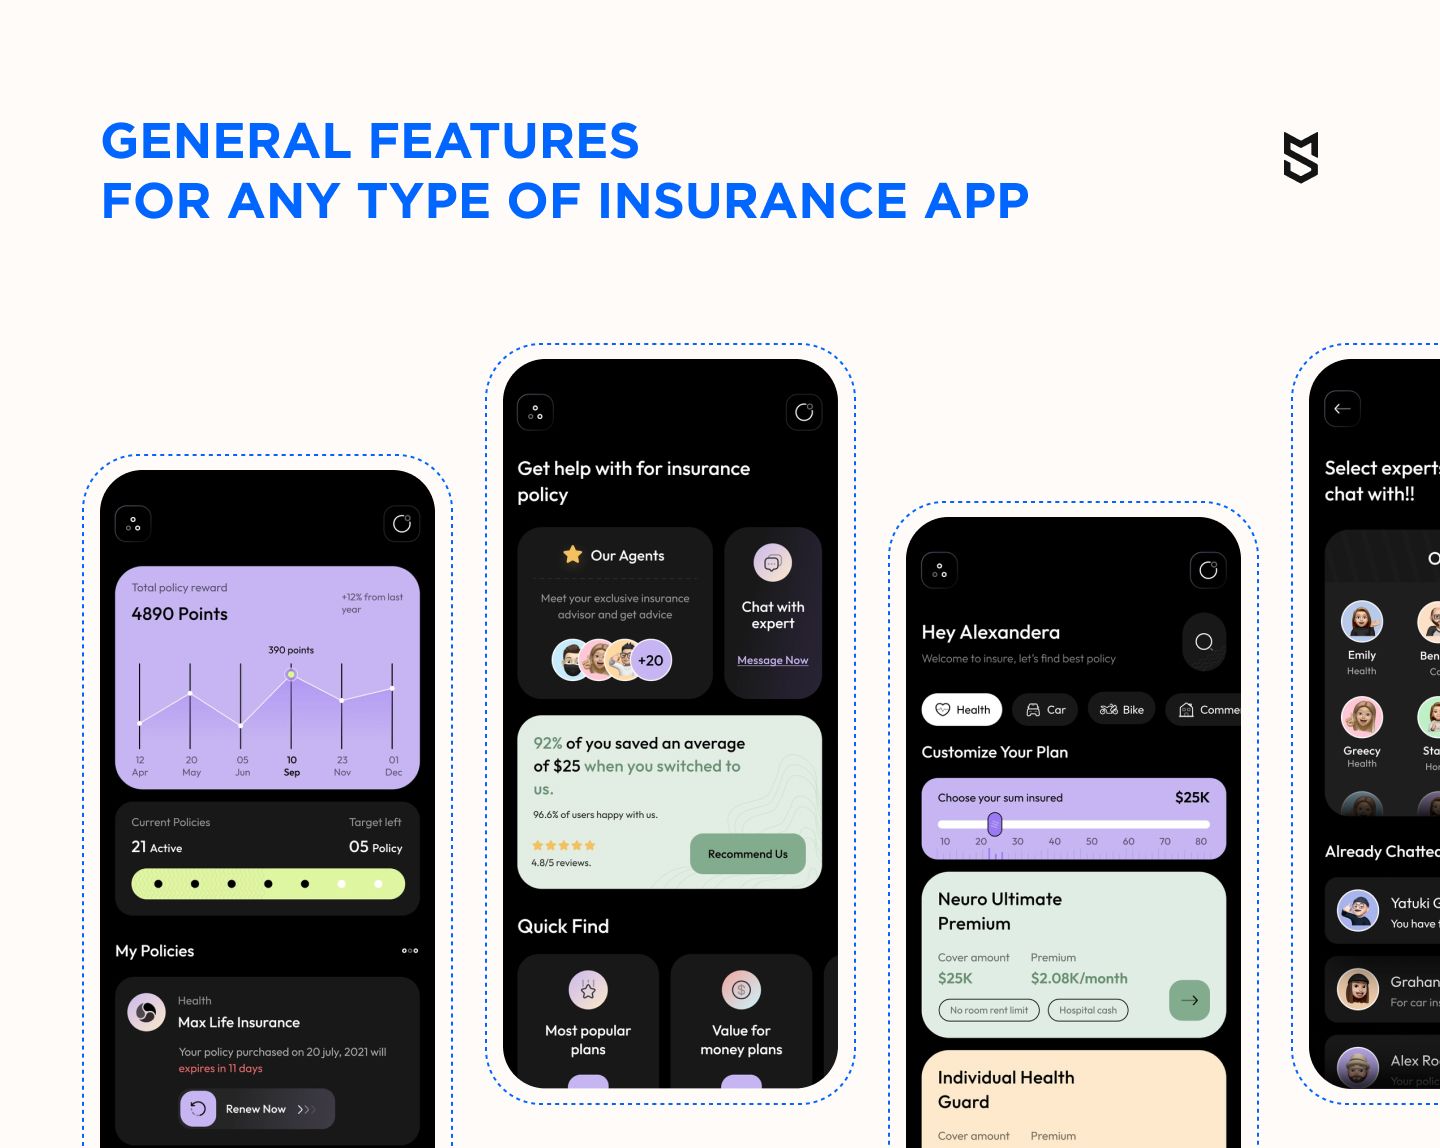 General features for any type of insurance app